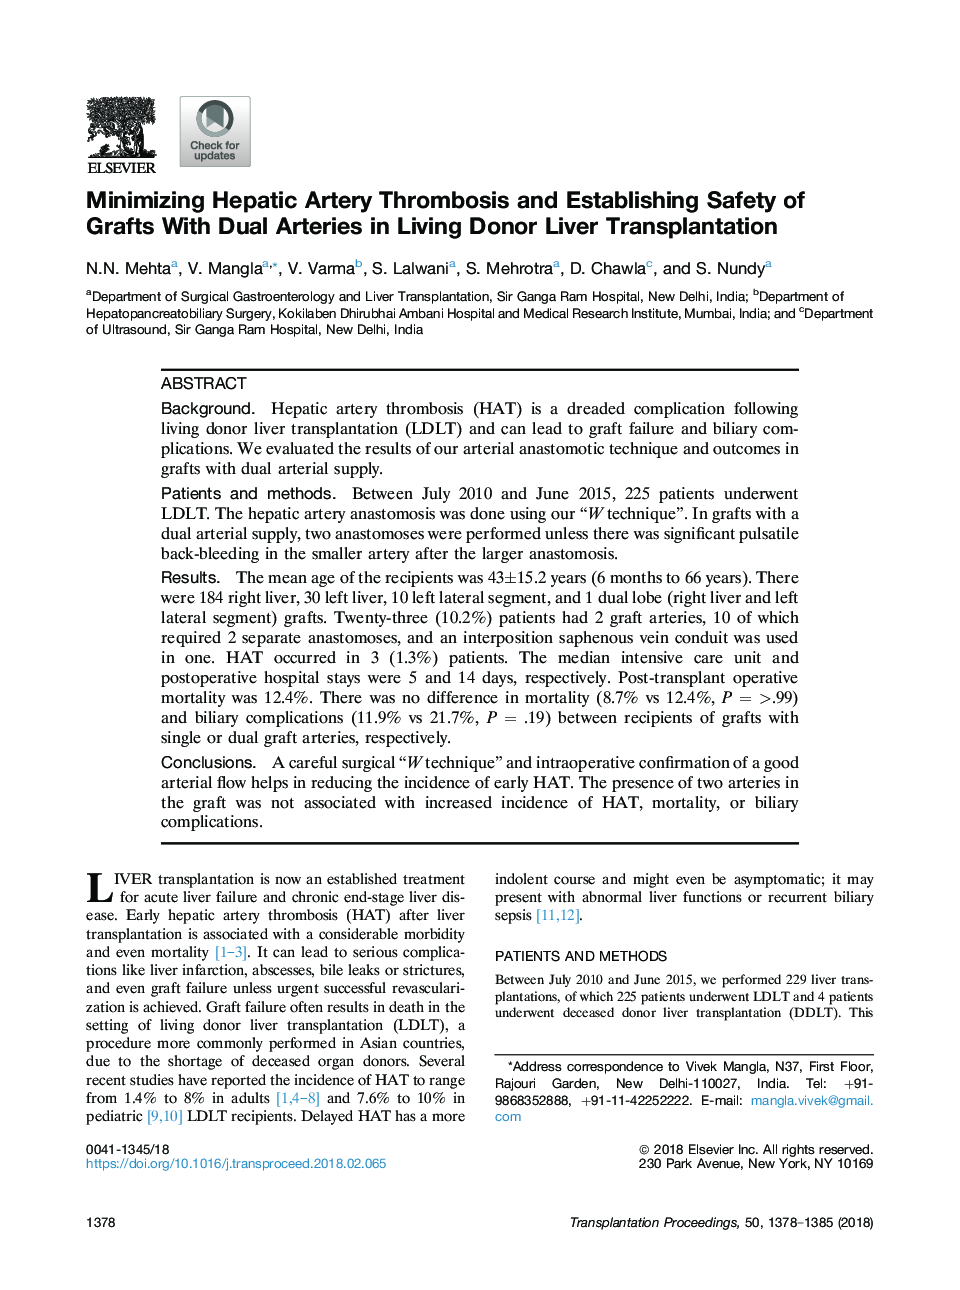 Minimizing Hepatic Artery Thrombosis and Establishing Safety of Grafts With Dual Arteries in Living Donor Liver Transplantation